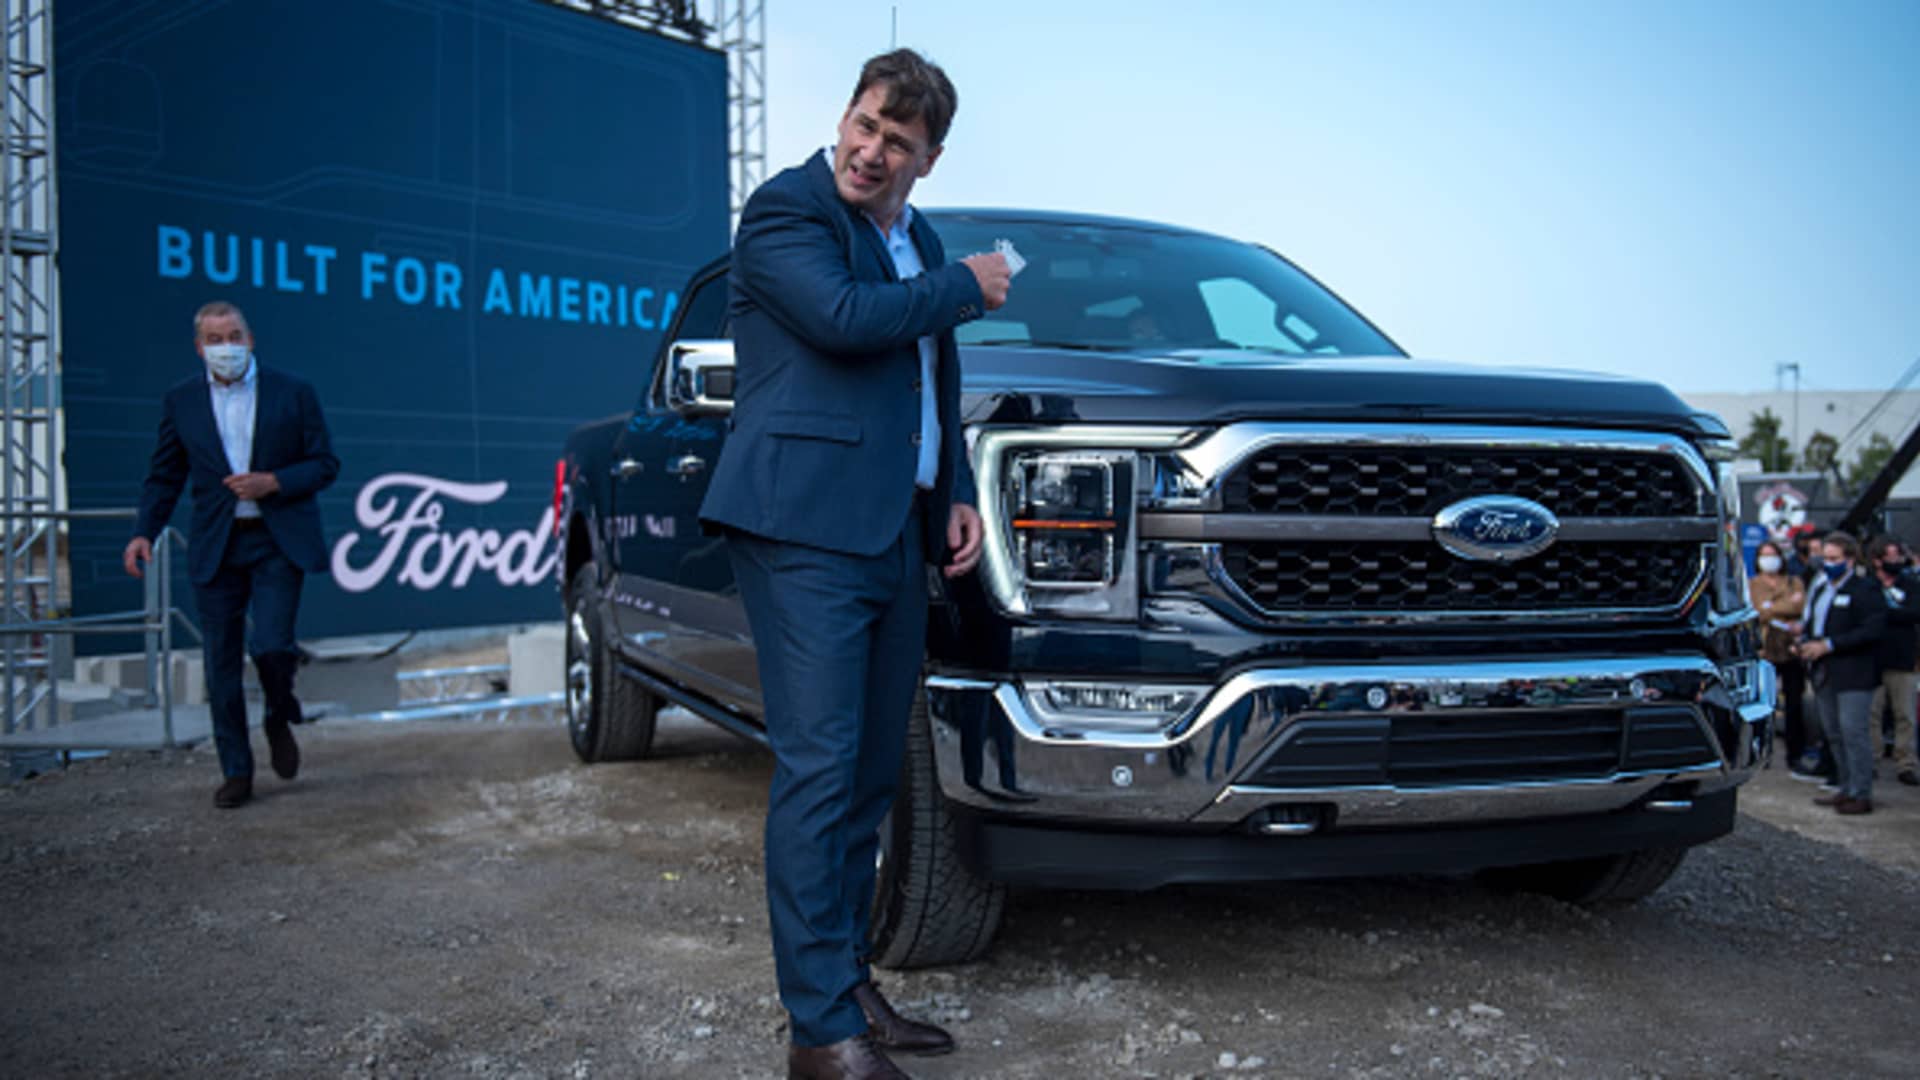 Ford CEO Jim Farley takes off his mask at the Ford Built for America event at Fords Dearborn Truck Plant on September 17, 2020 in Dearborn, Michigan.